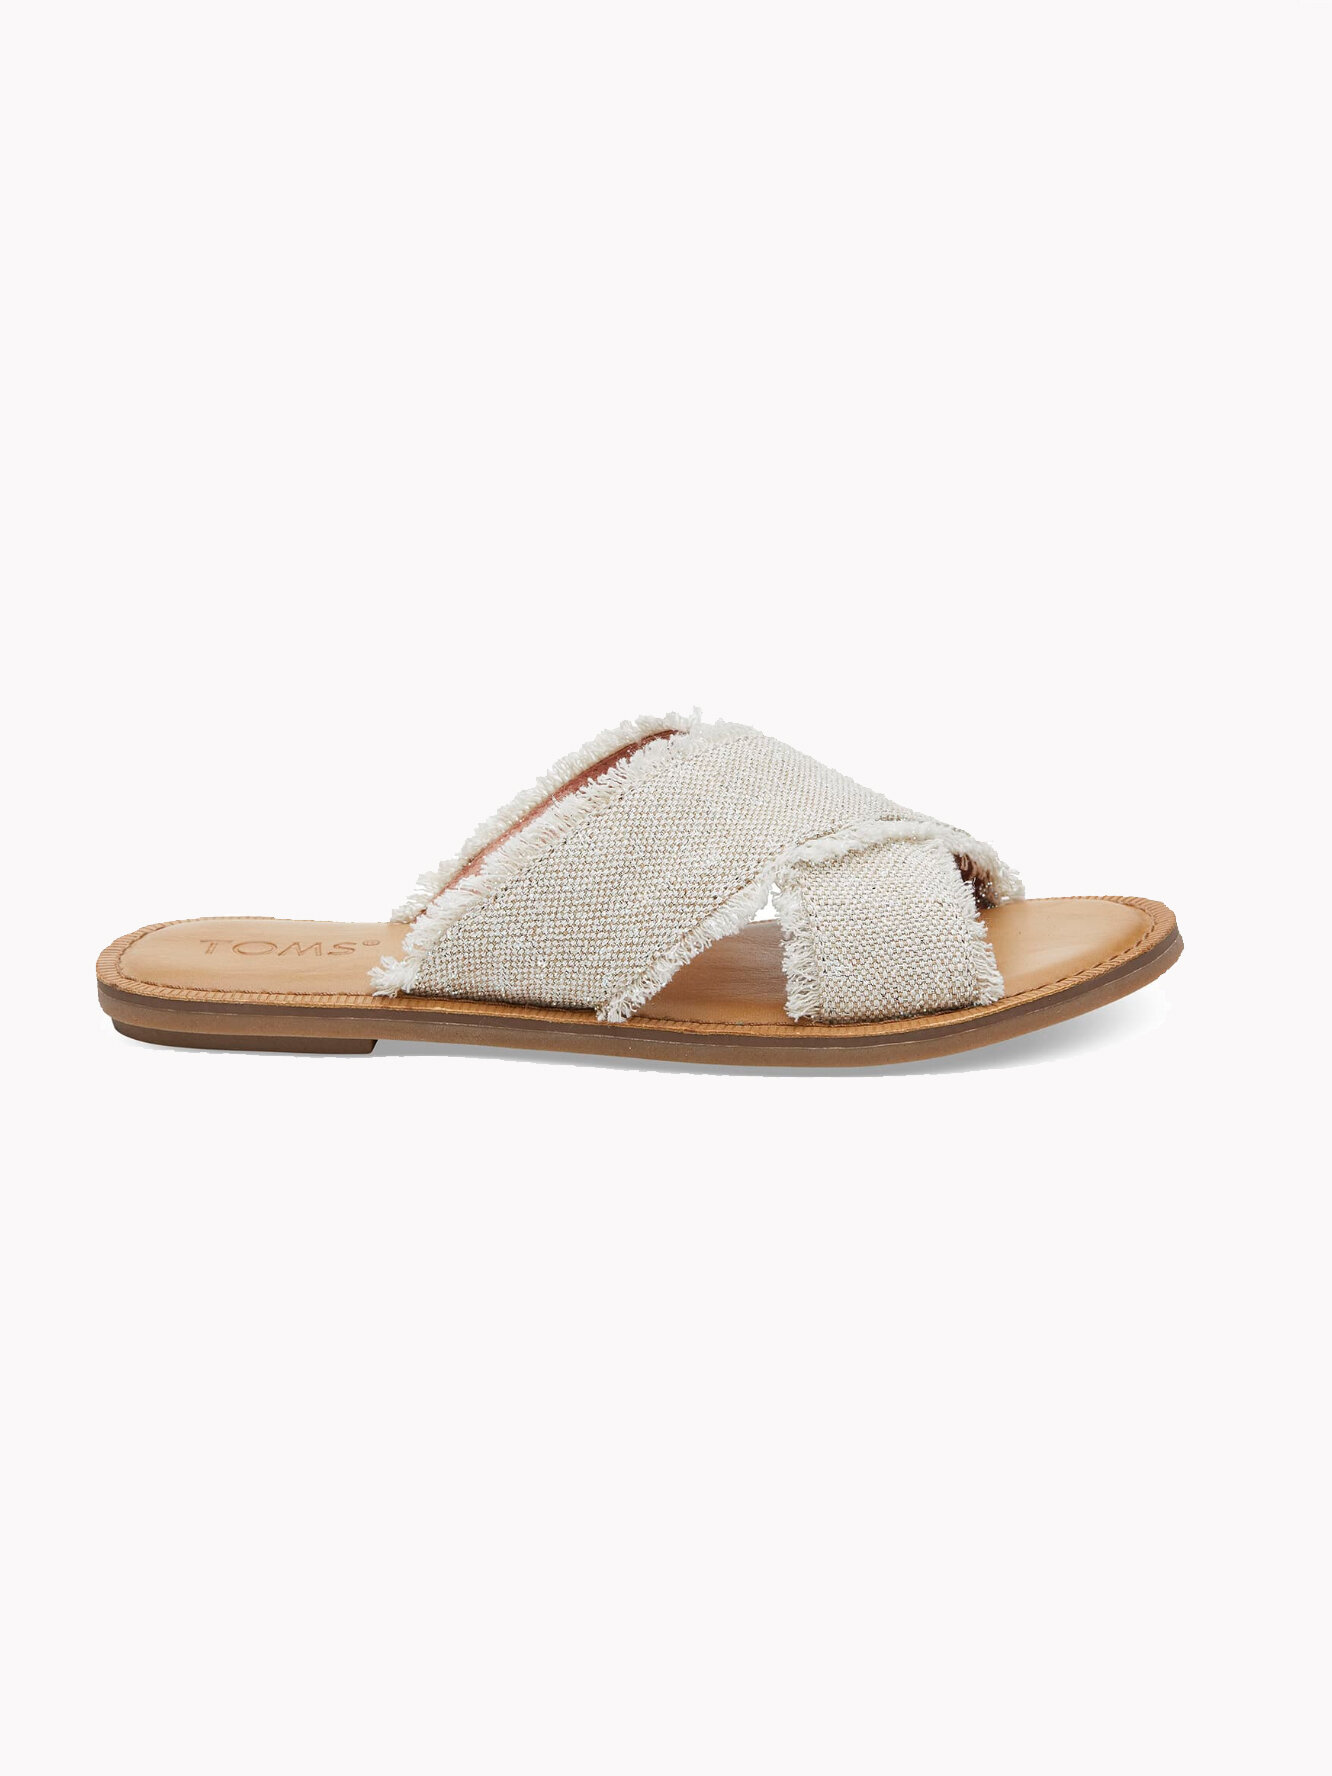 9 Vegan Sandals Perfect For Your Next Summer Adventure - The Good Trade